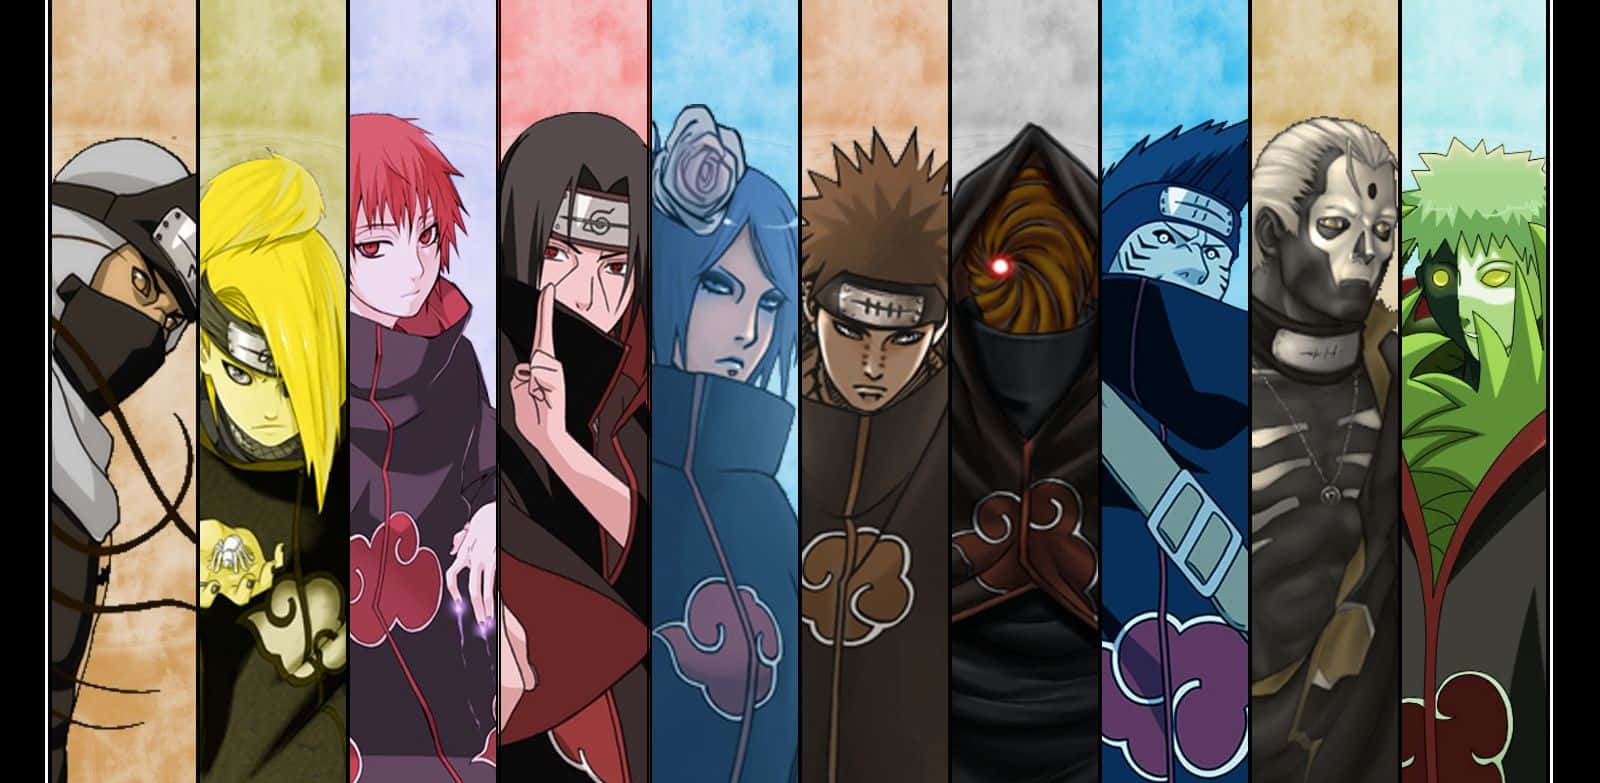 Naruto and his friends ready for action Wallpaper